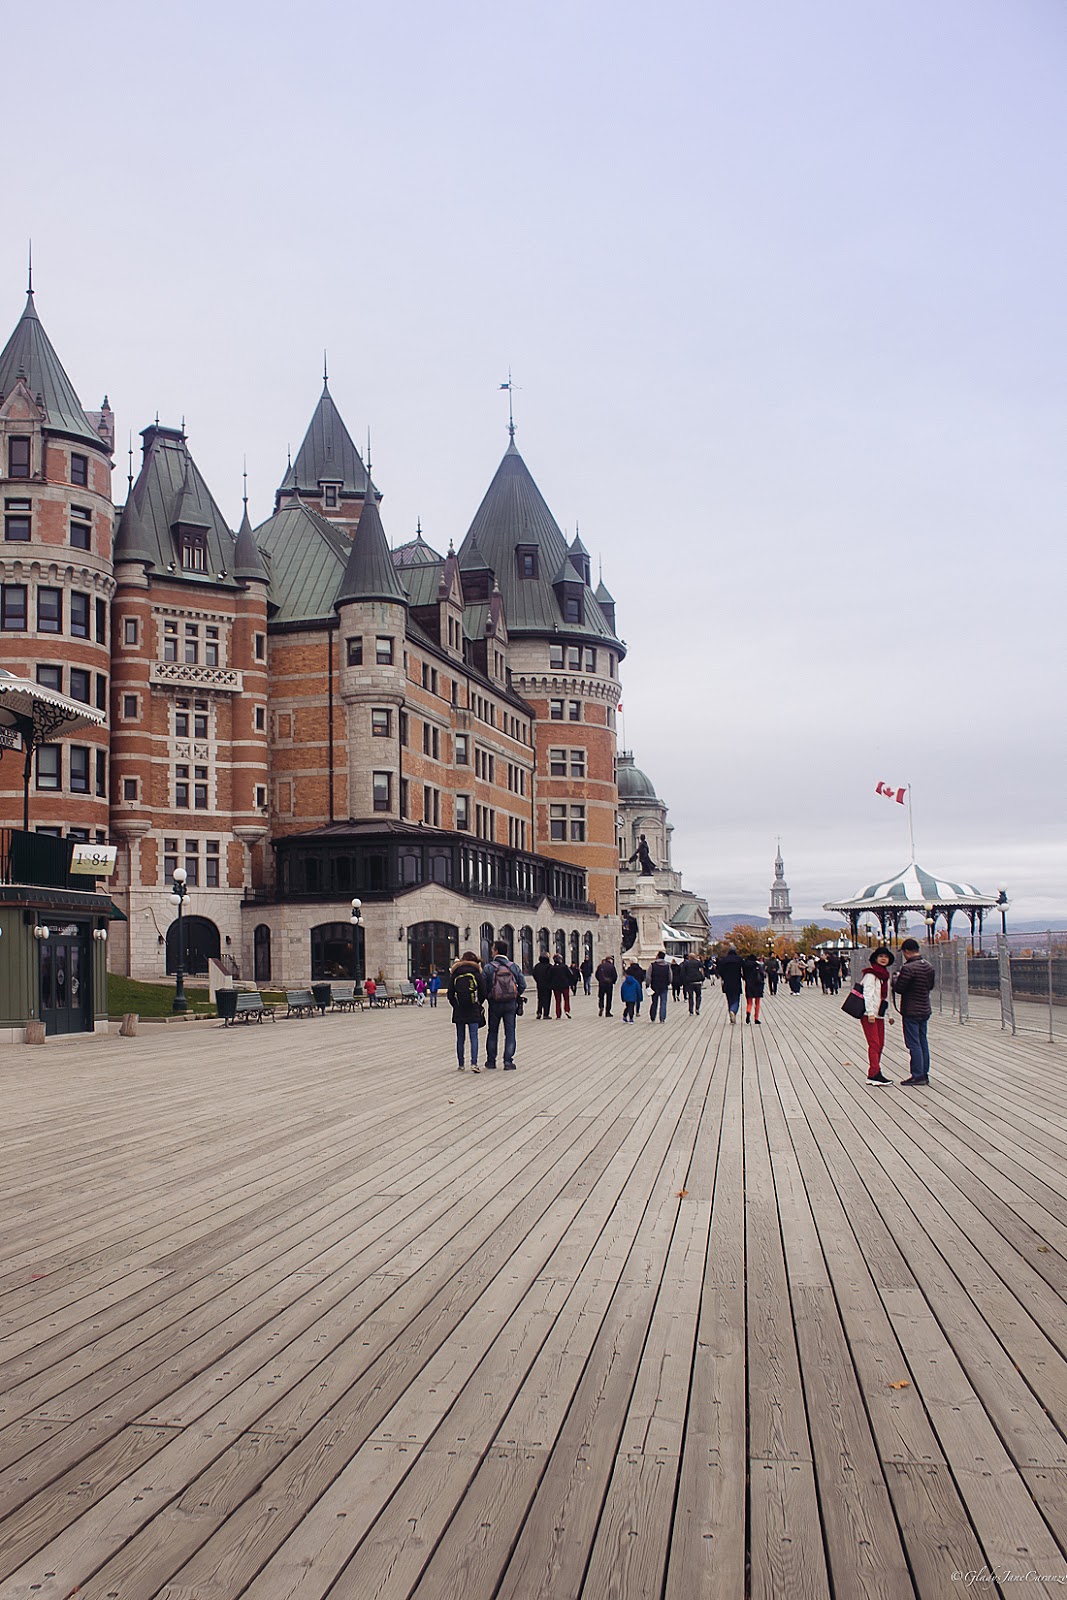 Fairmont Le Château Frontenac: Things To Do in Quebec, Canada